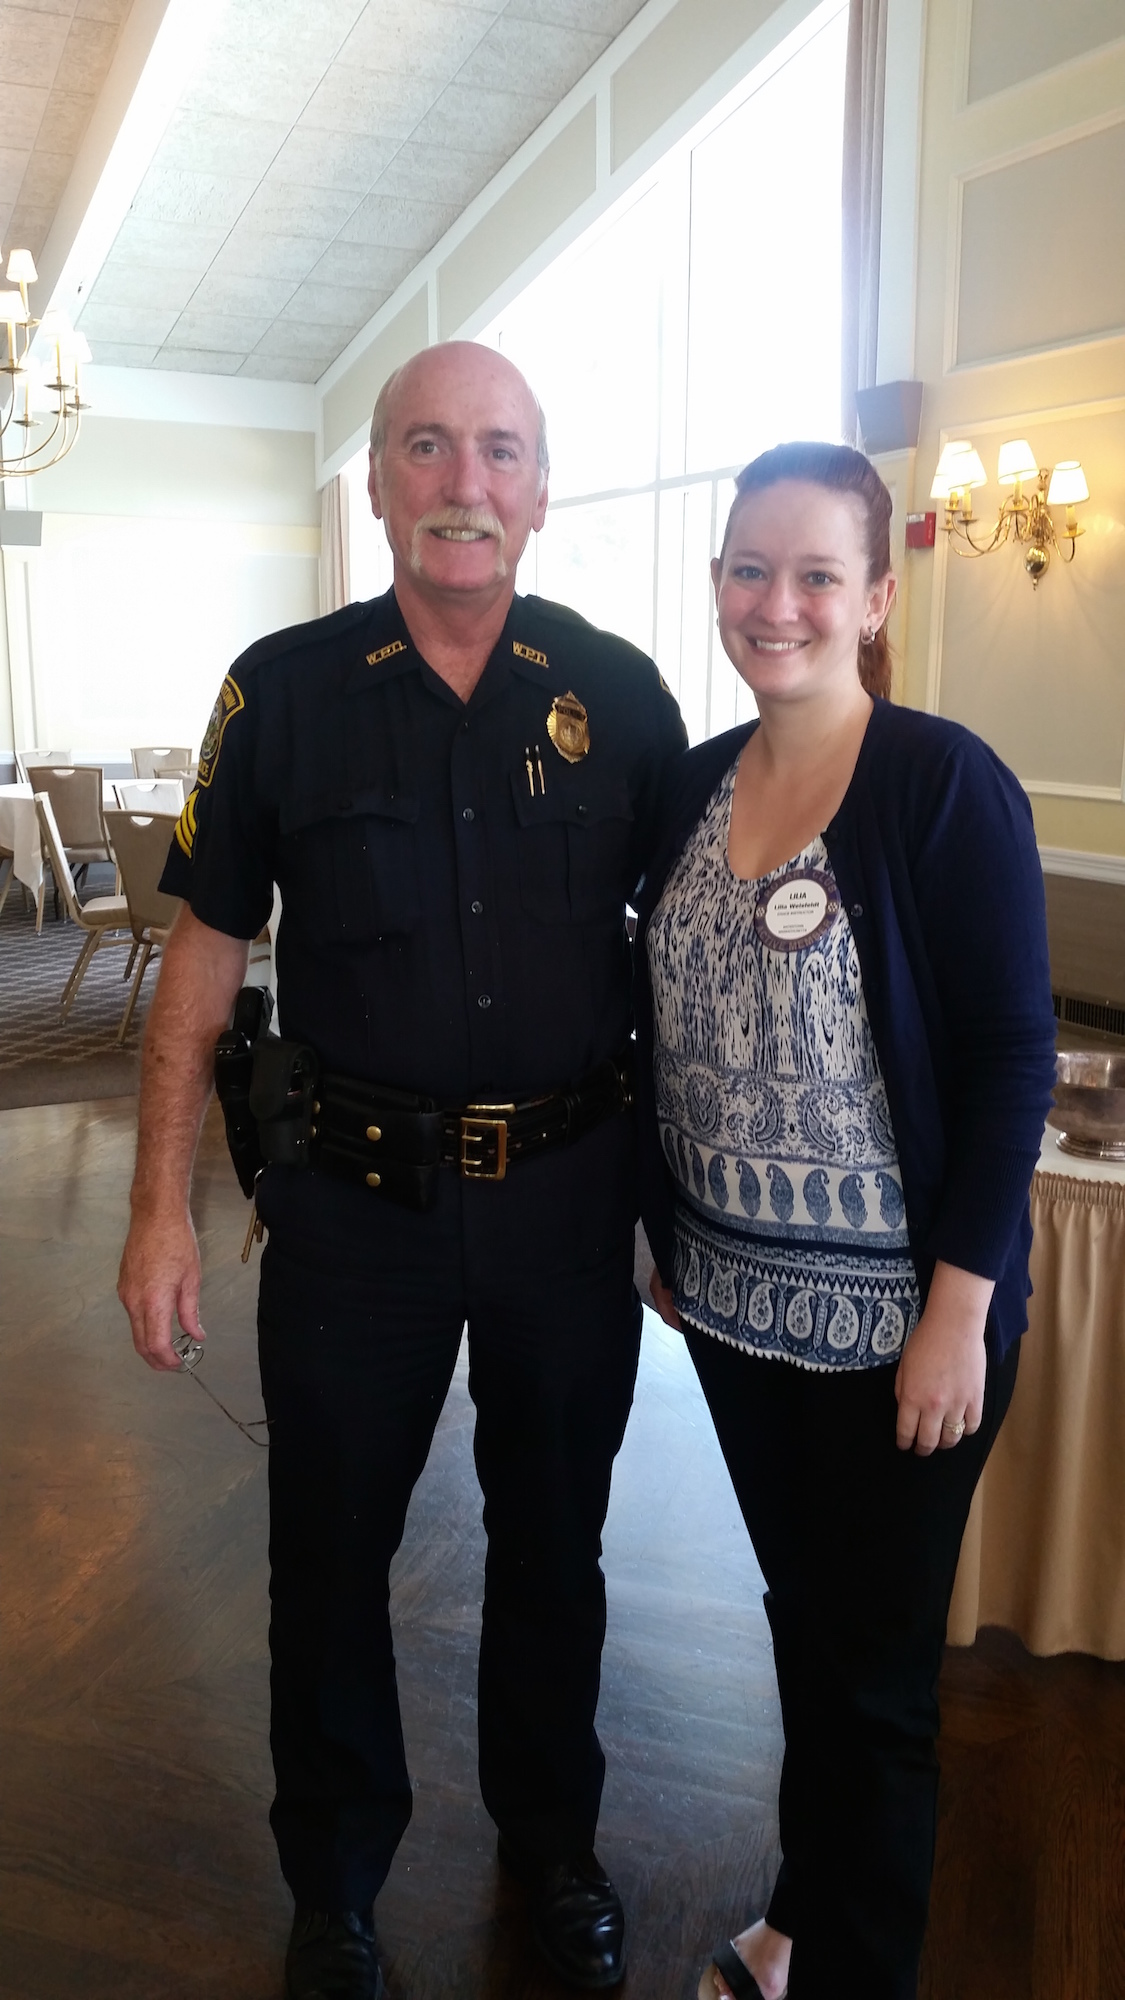 Watertown Police Sgt. Jeff Pugliese and Lilia Weisfeldt, President of the Rotary Club of Watertown during a recent Rotary Club meeting.